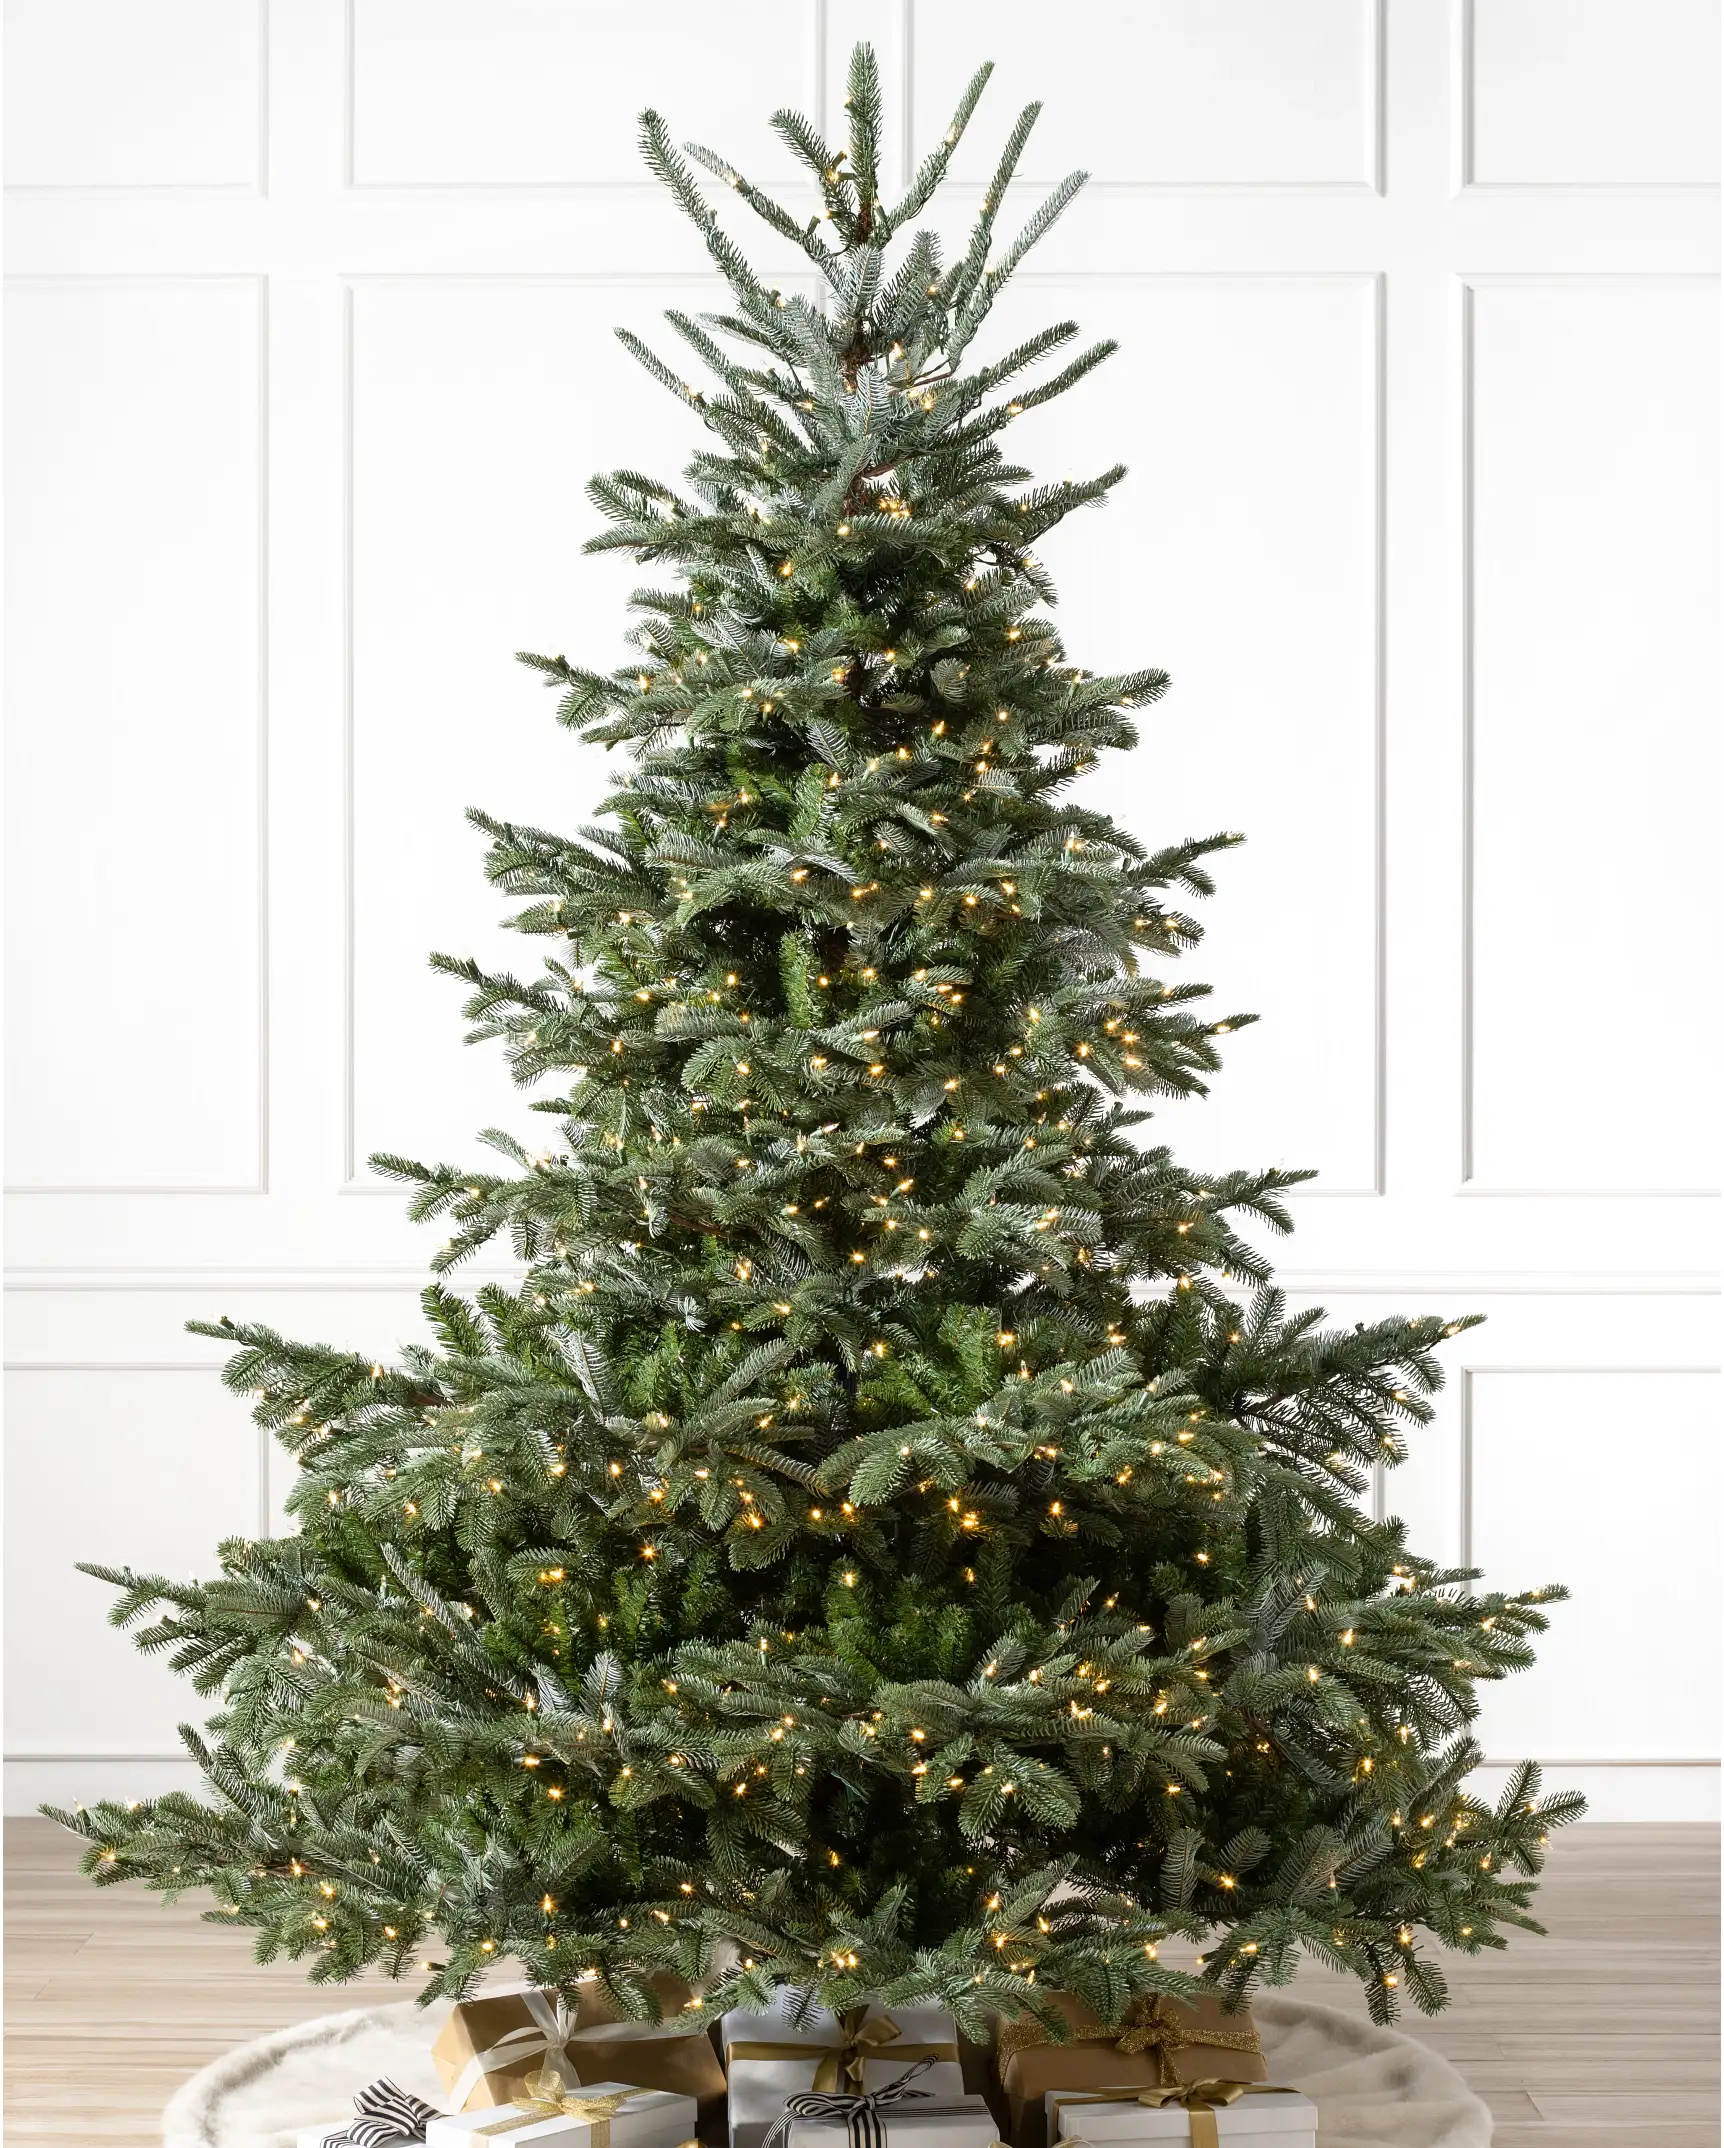 How To Buy An Artificial Christmas Tree?